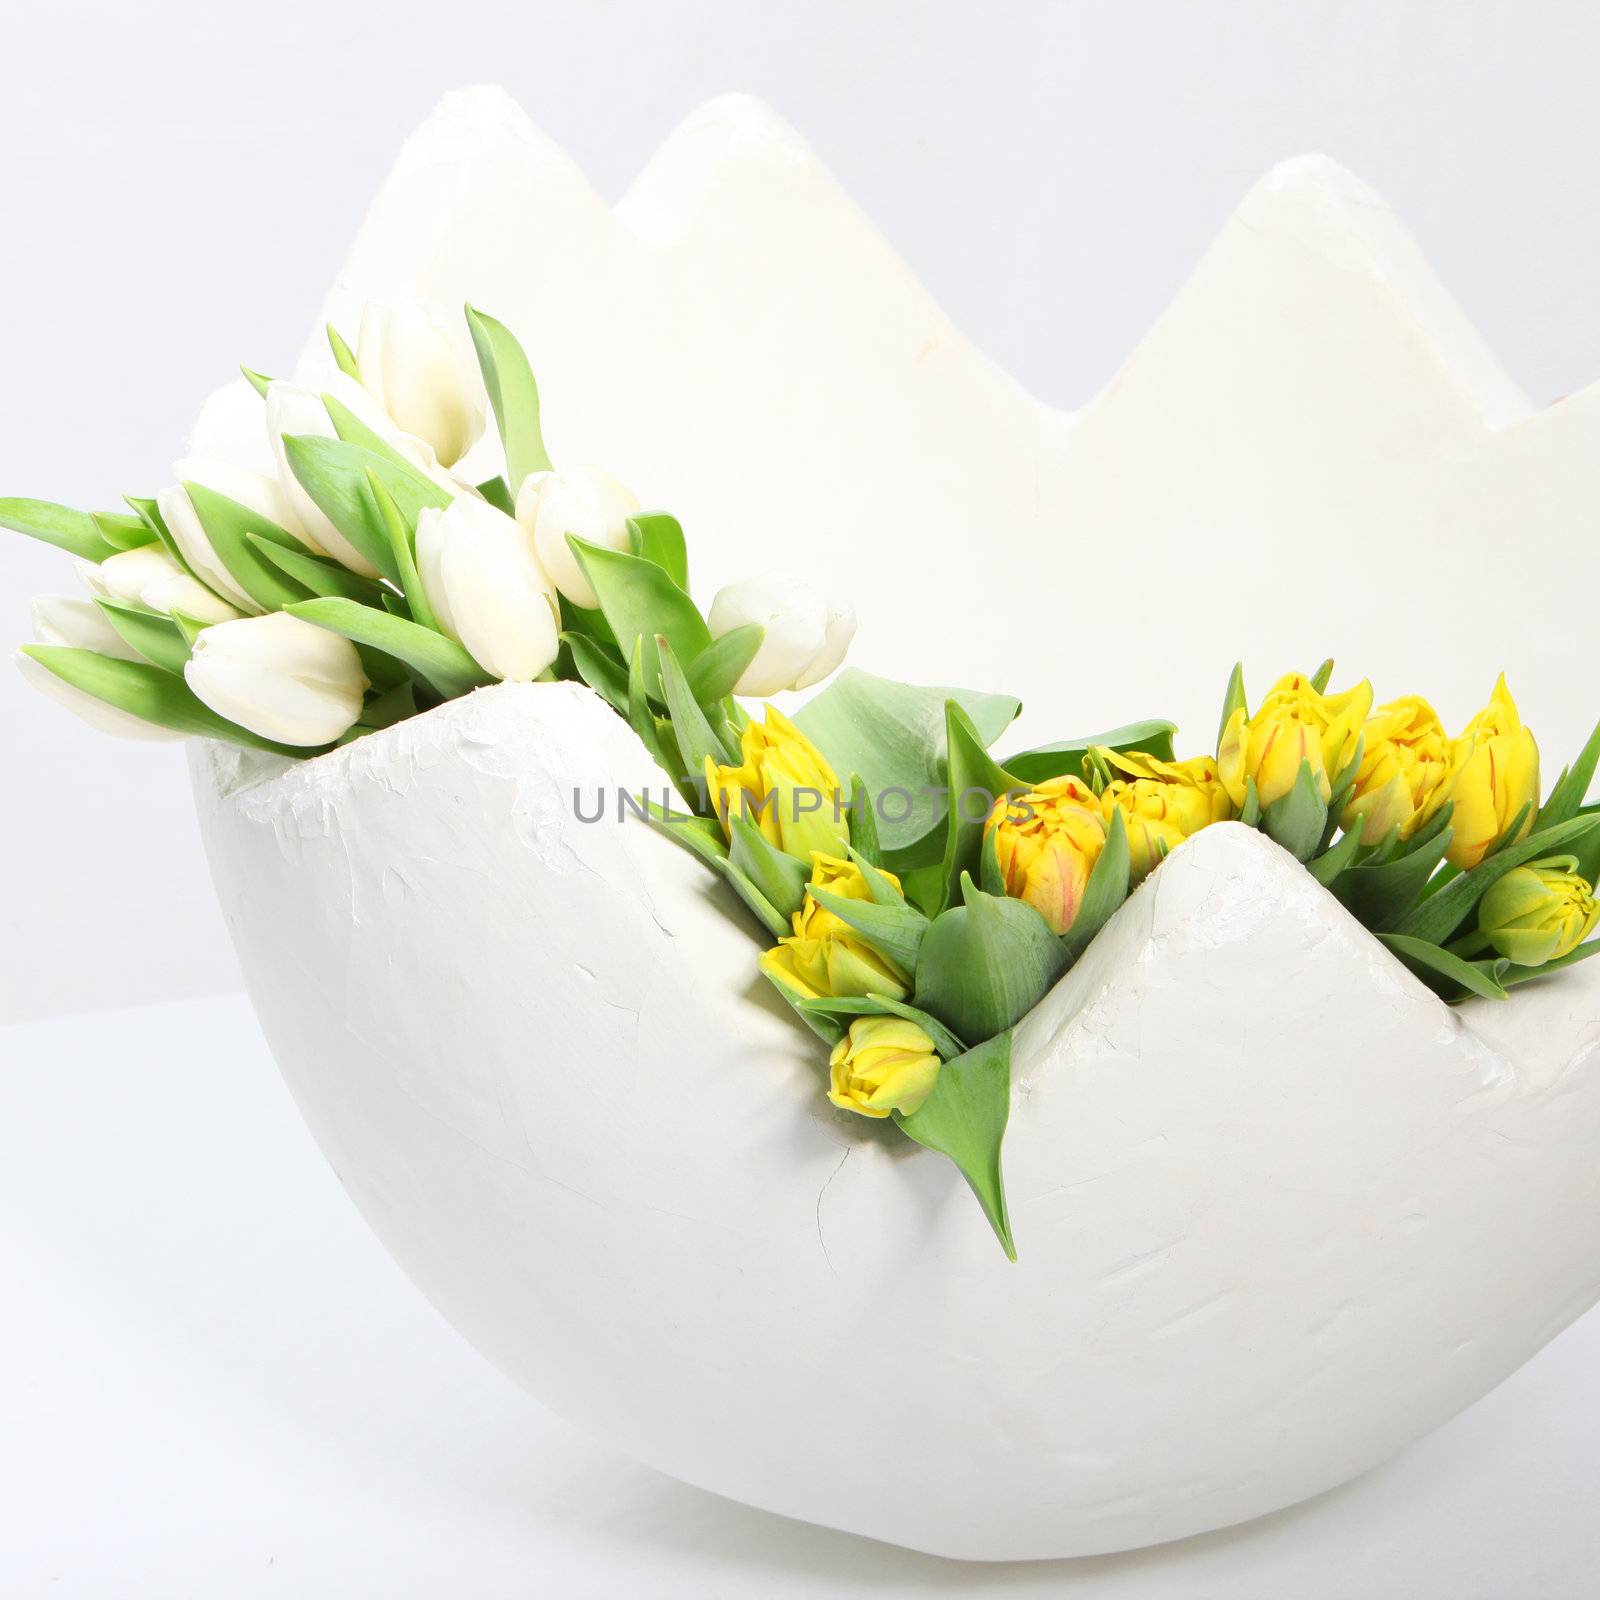 Celebrating the festival of Easter in Spring with colourful fresh yellow and white tulips nestling inside a broken white egg shell ornament